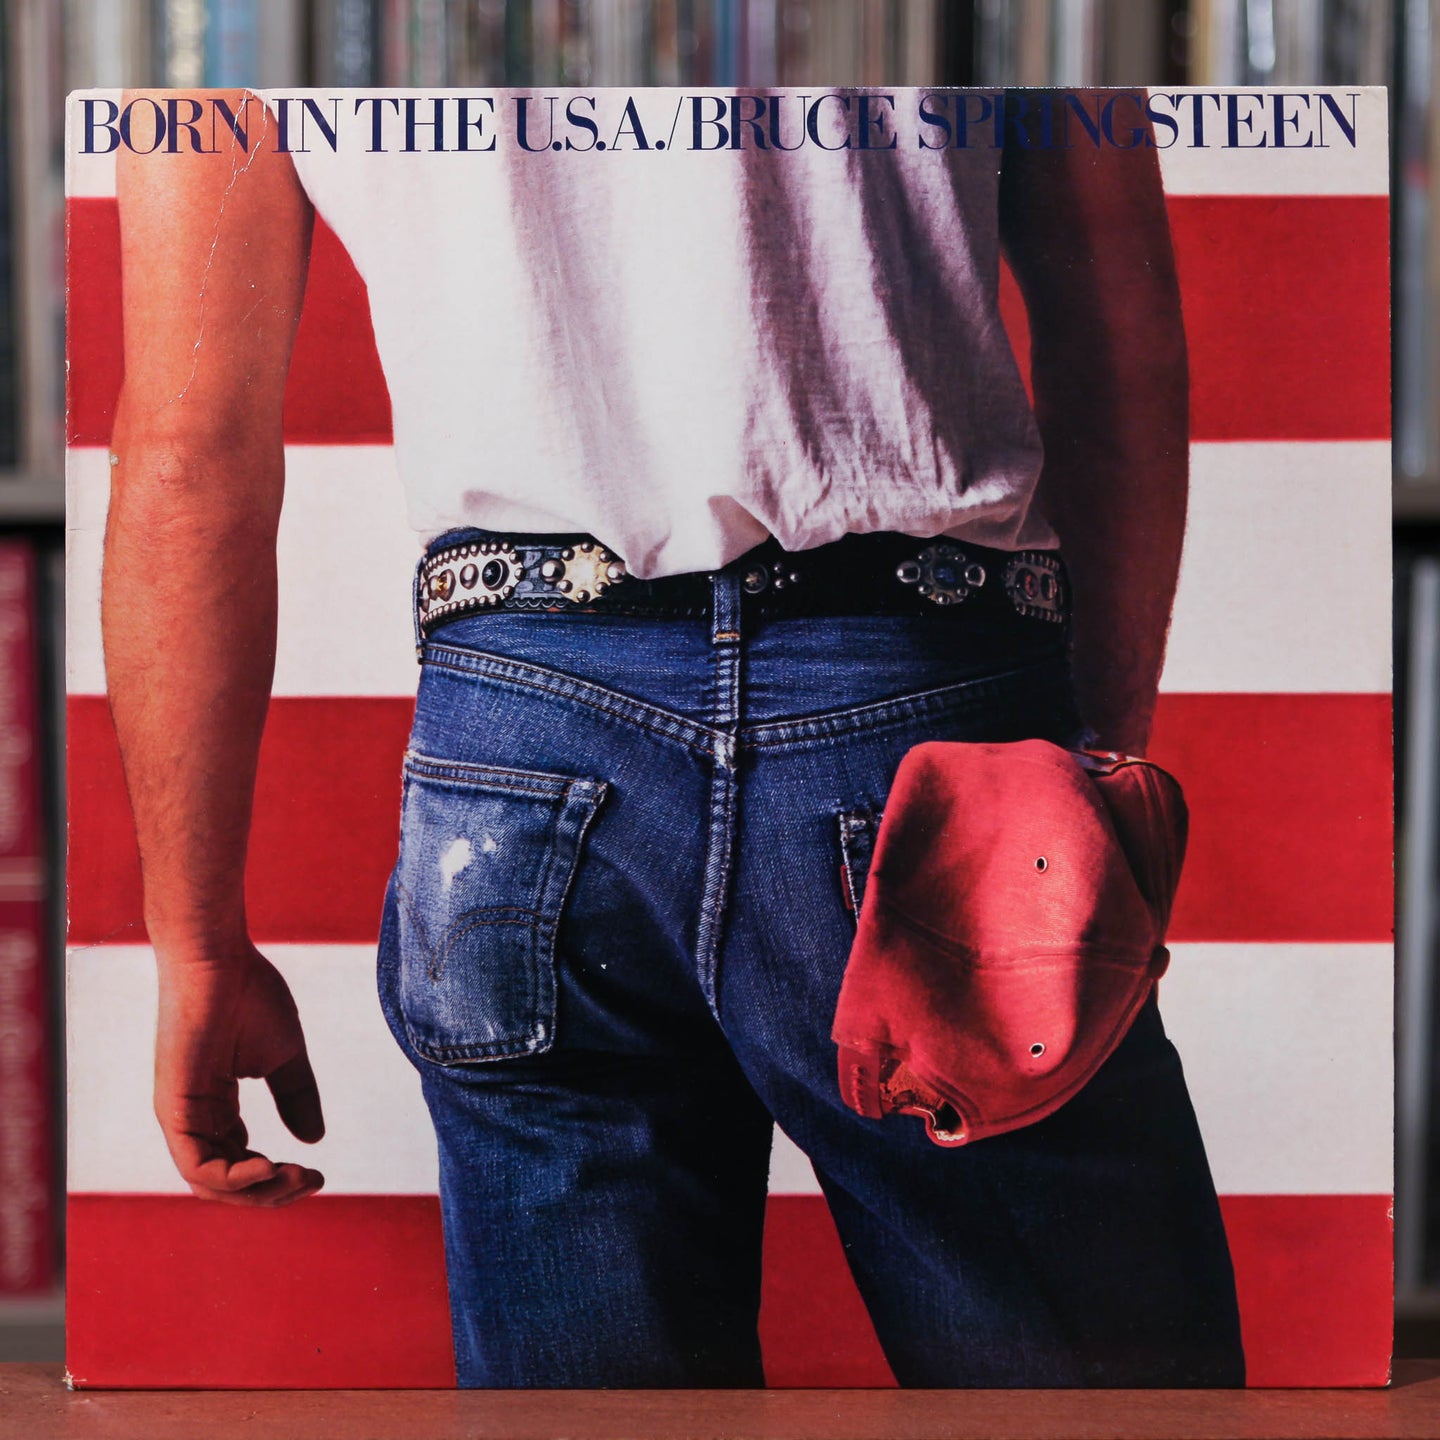 Bruce Springsteen - Born In The U.S.A. - 1984  Columbia, VG/VG+